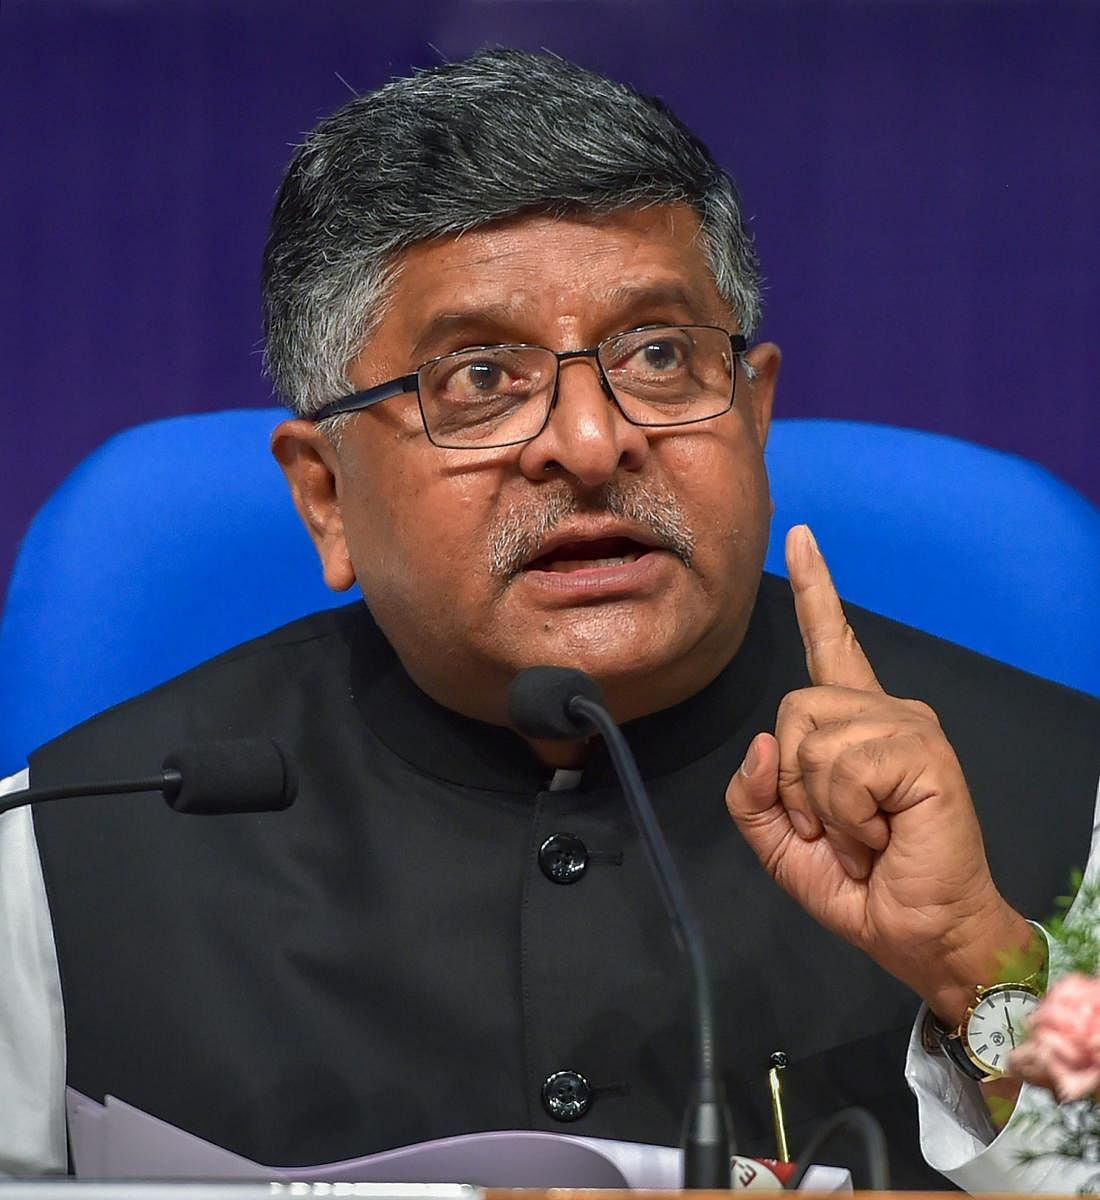 Union Minister for IT and Law and Justice Ravi Shankar Prasad